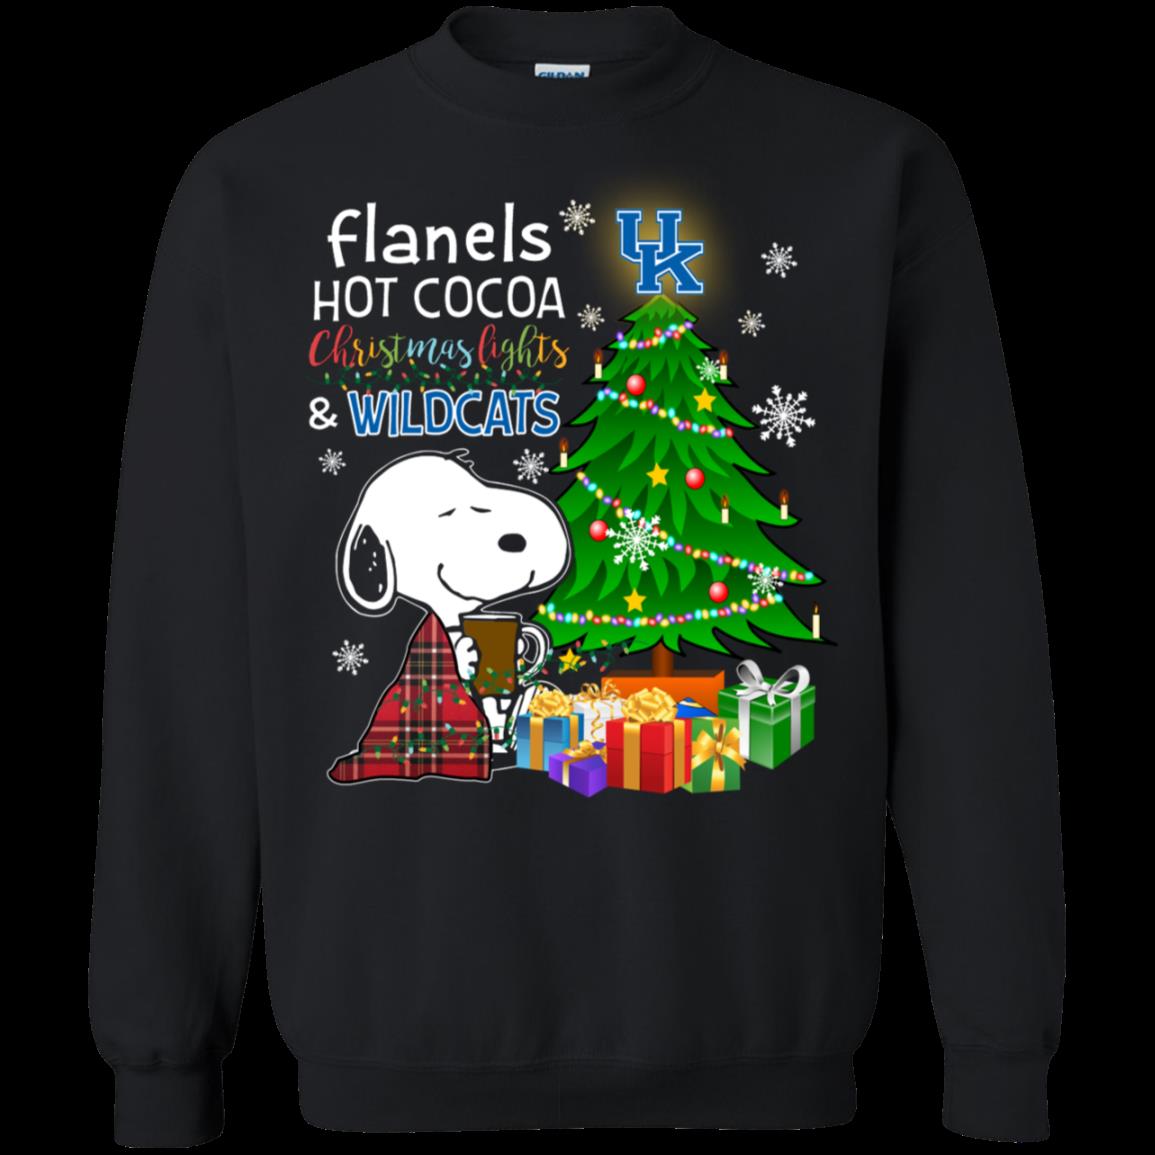 Kentucky Wildcats Snoopy Ugly Christmas Sweater Flanels Hot Cocoa